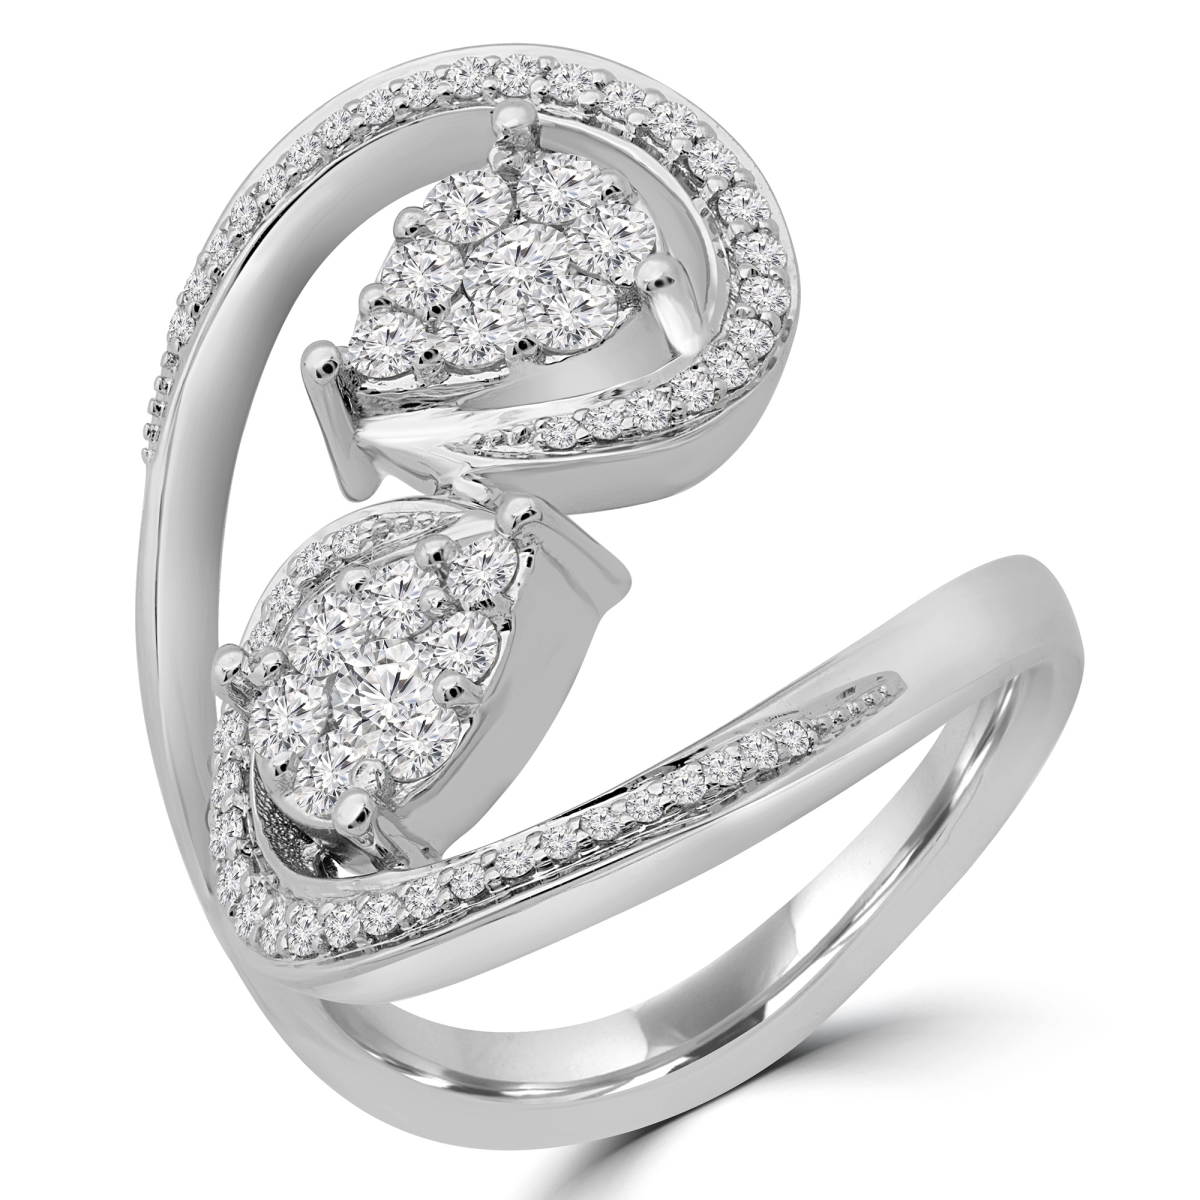 Picture of Majesty Diamonds MDR190070-3.25 0.67 CTW Round Diamond Swirl Pear Cluster Ring in 14K White Gold - Size 3.25